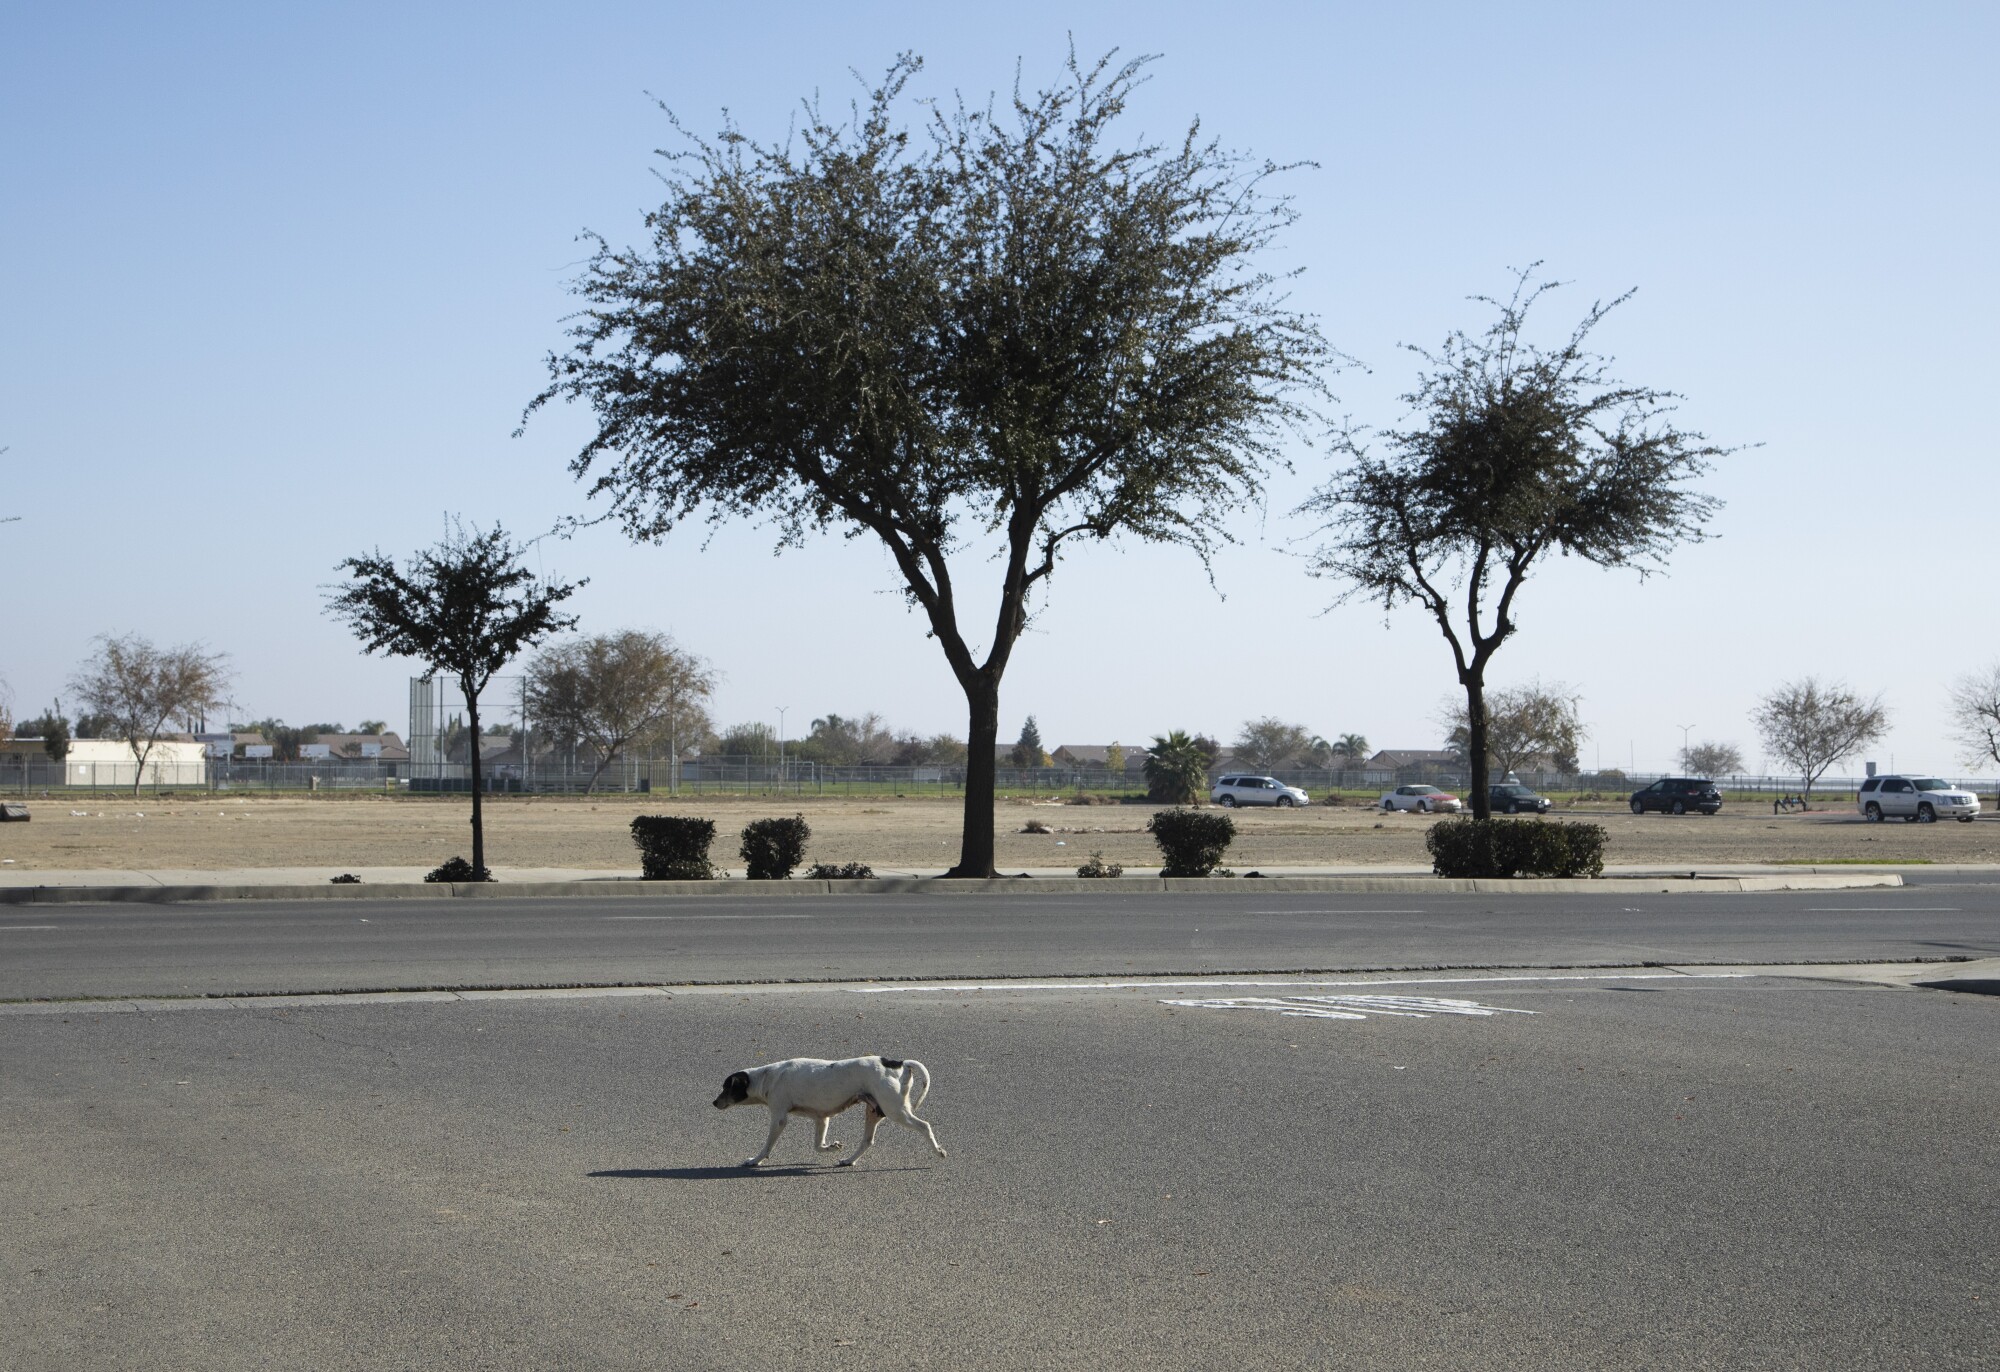 A dog trots across a road in Huron, a small, rural city in Fresno County.